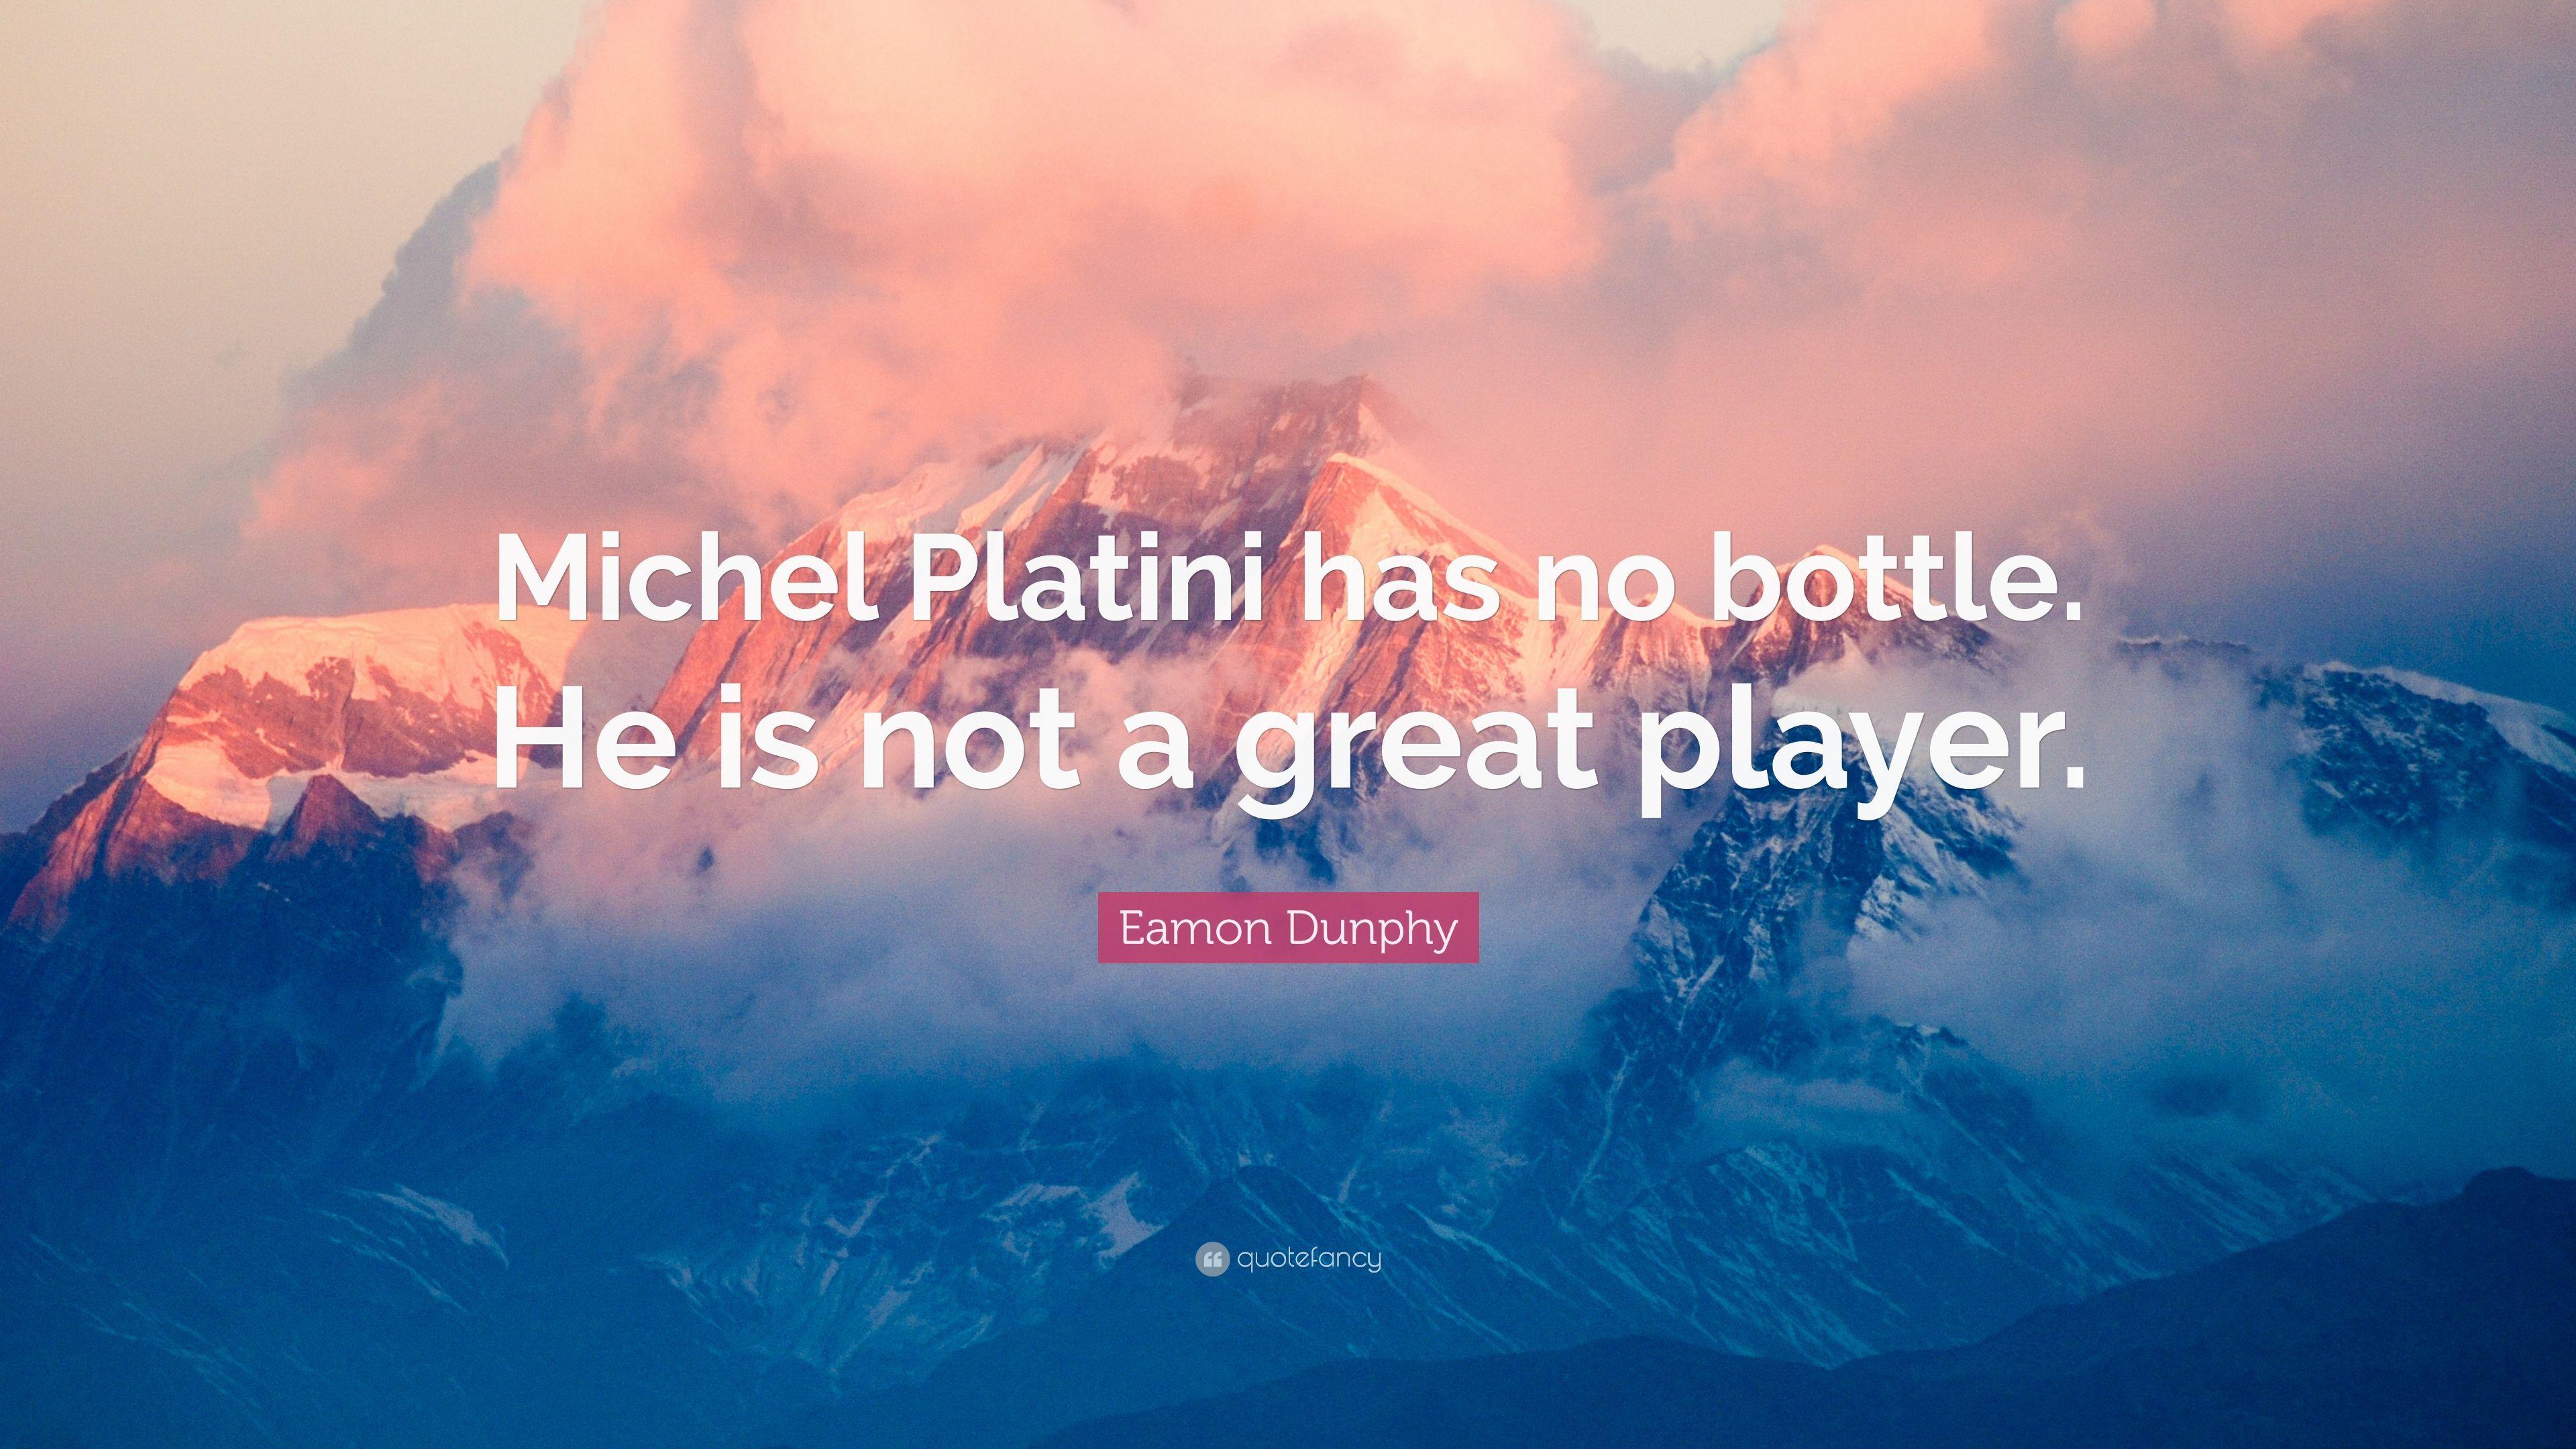 Eamon Dunphy Quote: “Michel Platini has no bottle. He is not a great